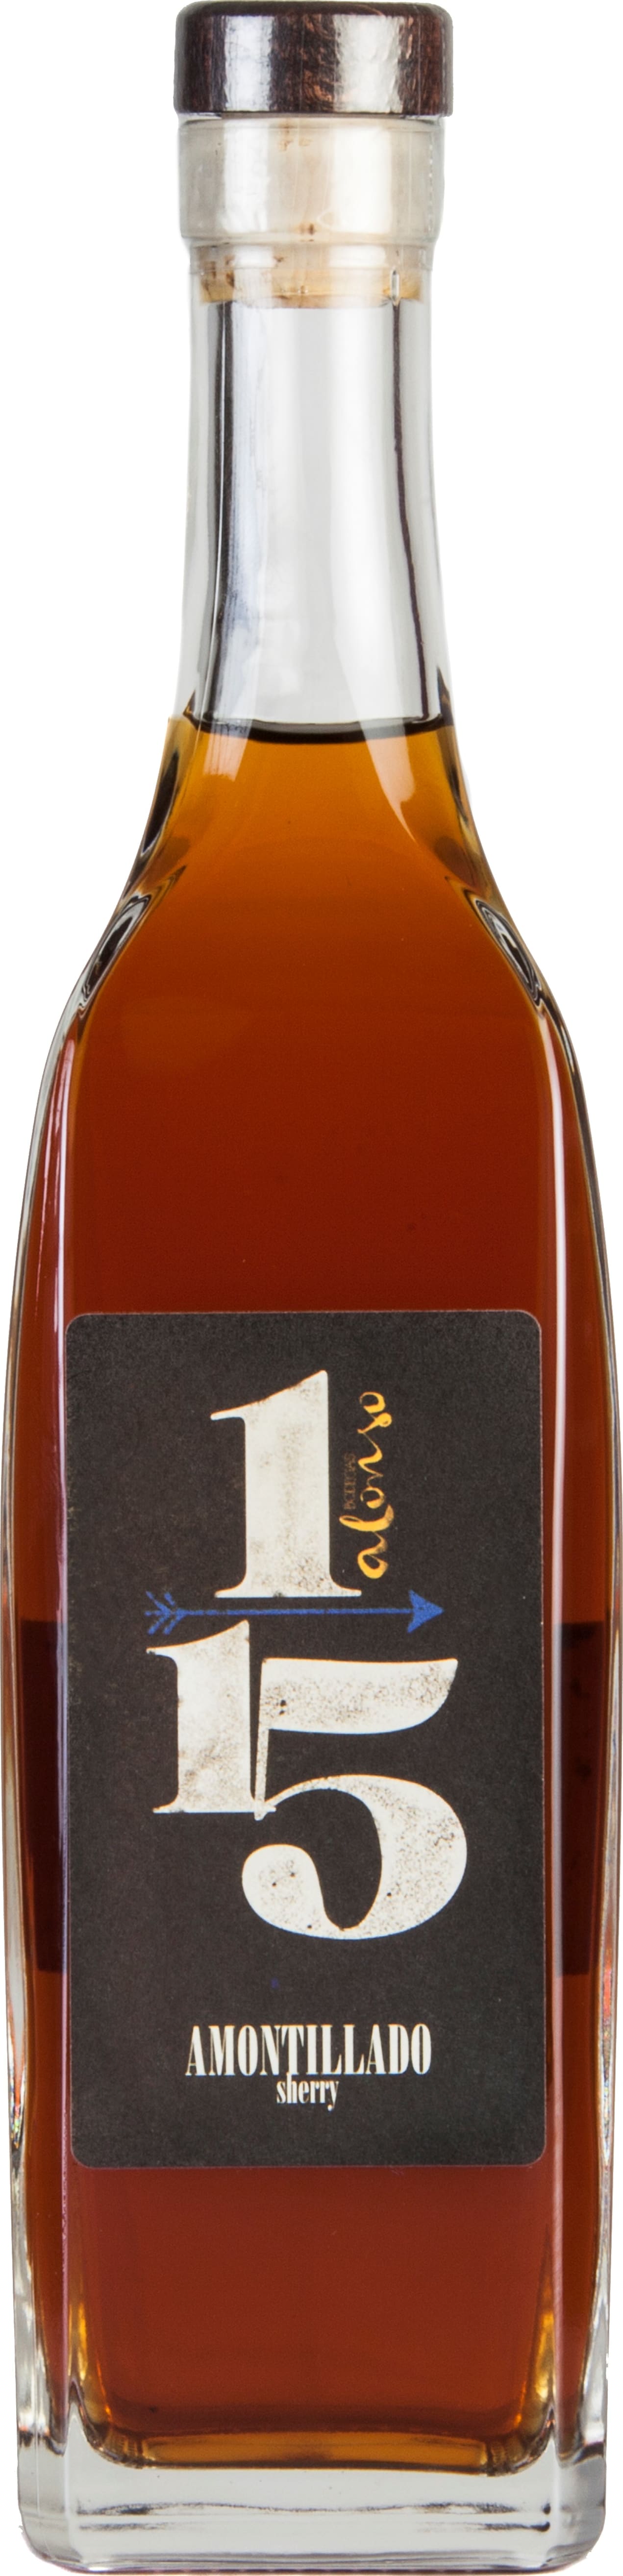 Bodegas Alonso 1/15 Amontillado 50cl 50cl NV - Buy Bodegas Alonso Wines from GREAT WINES DIRECT wine shop